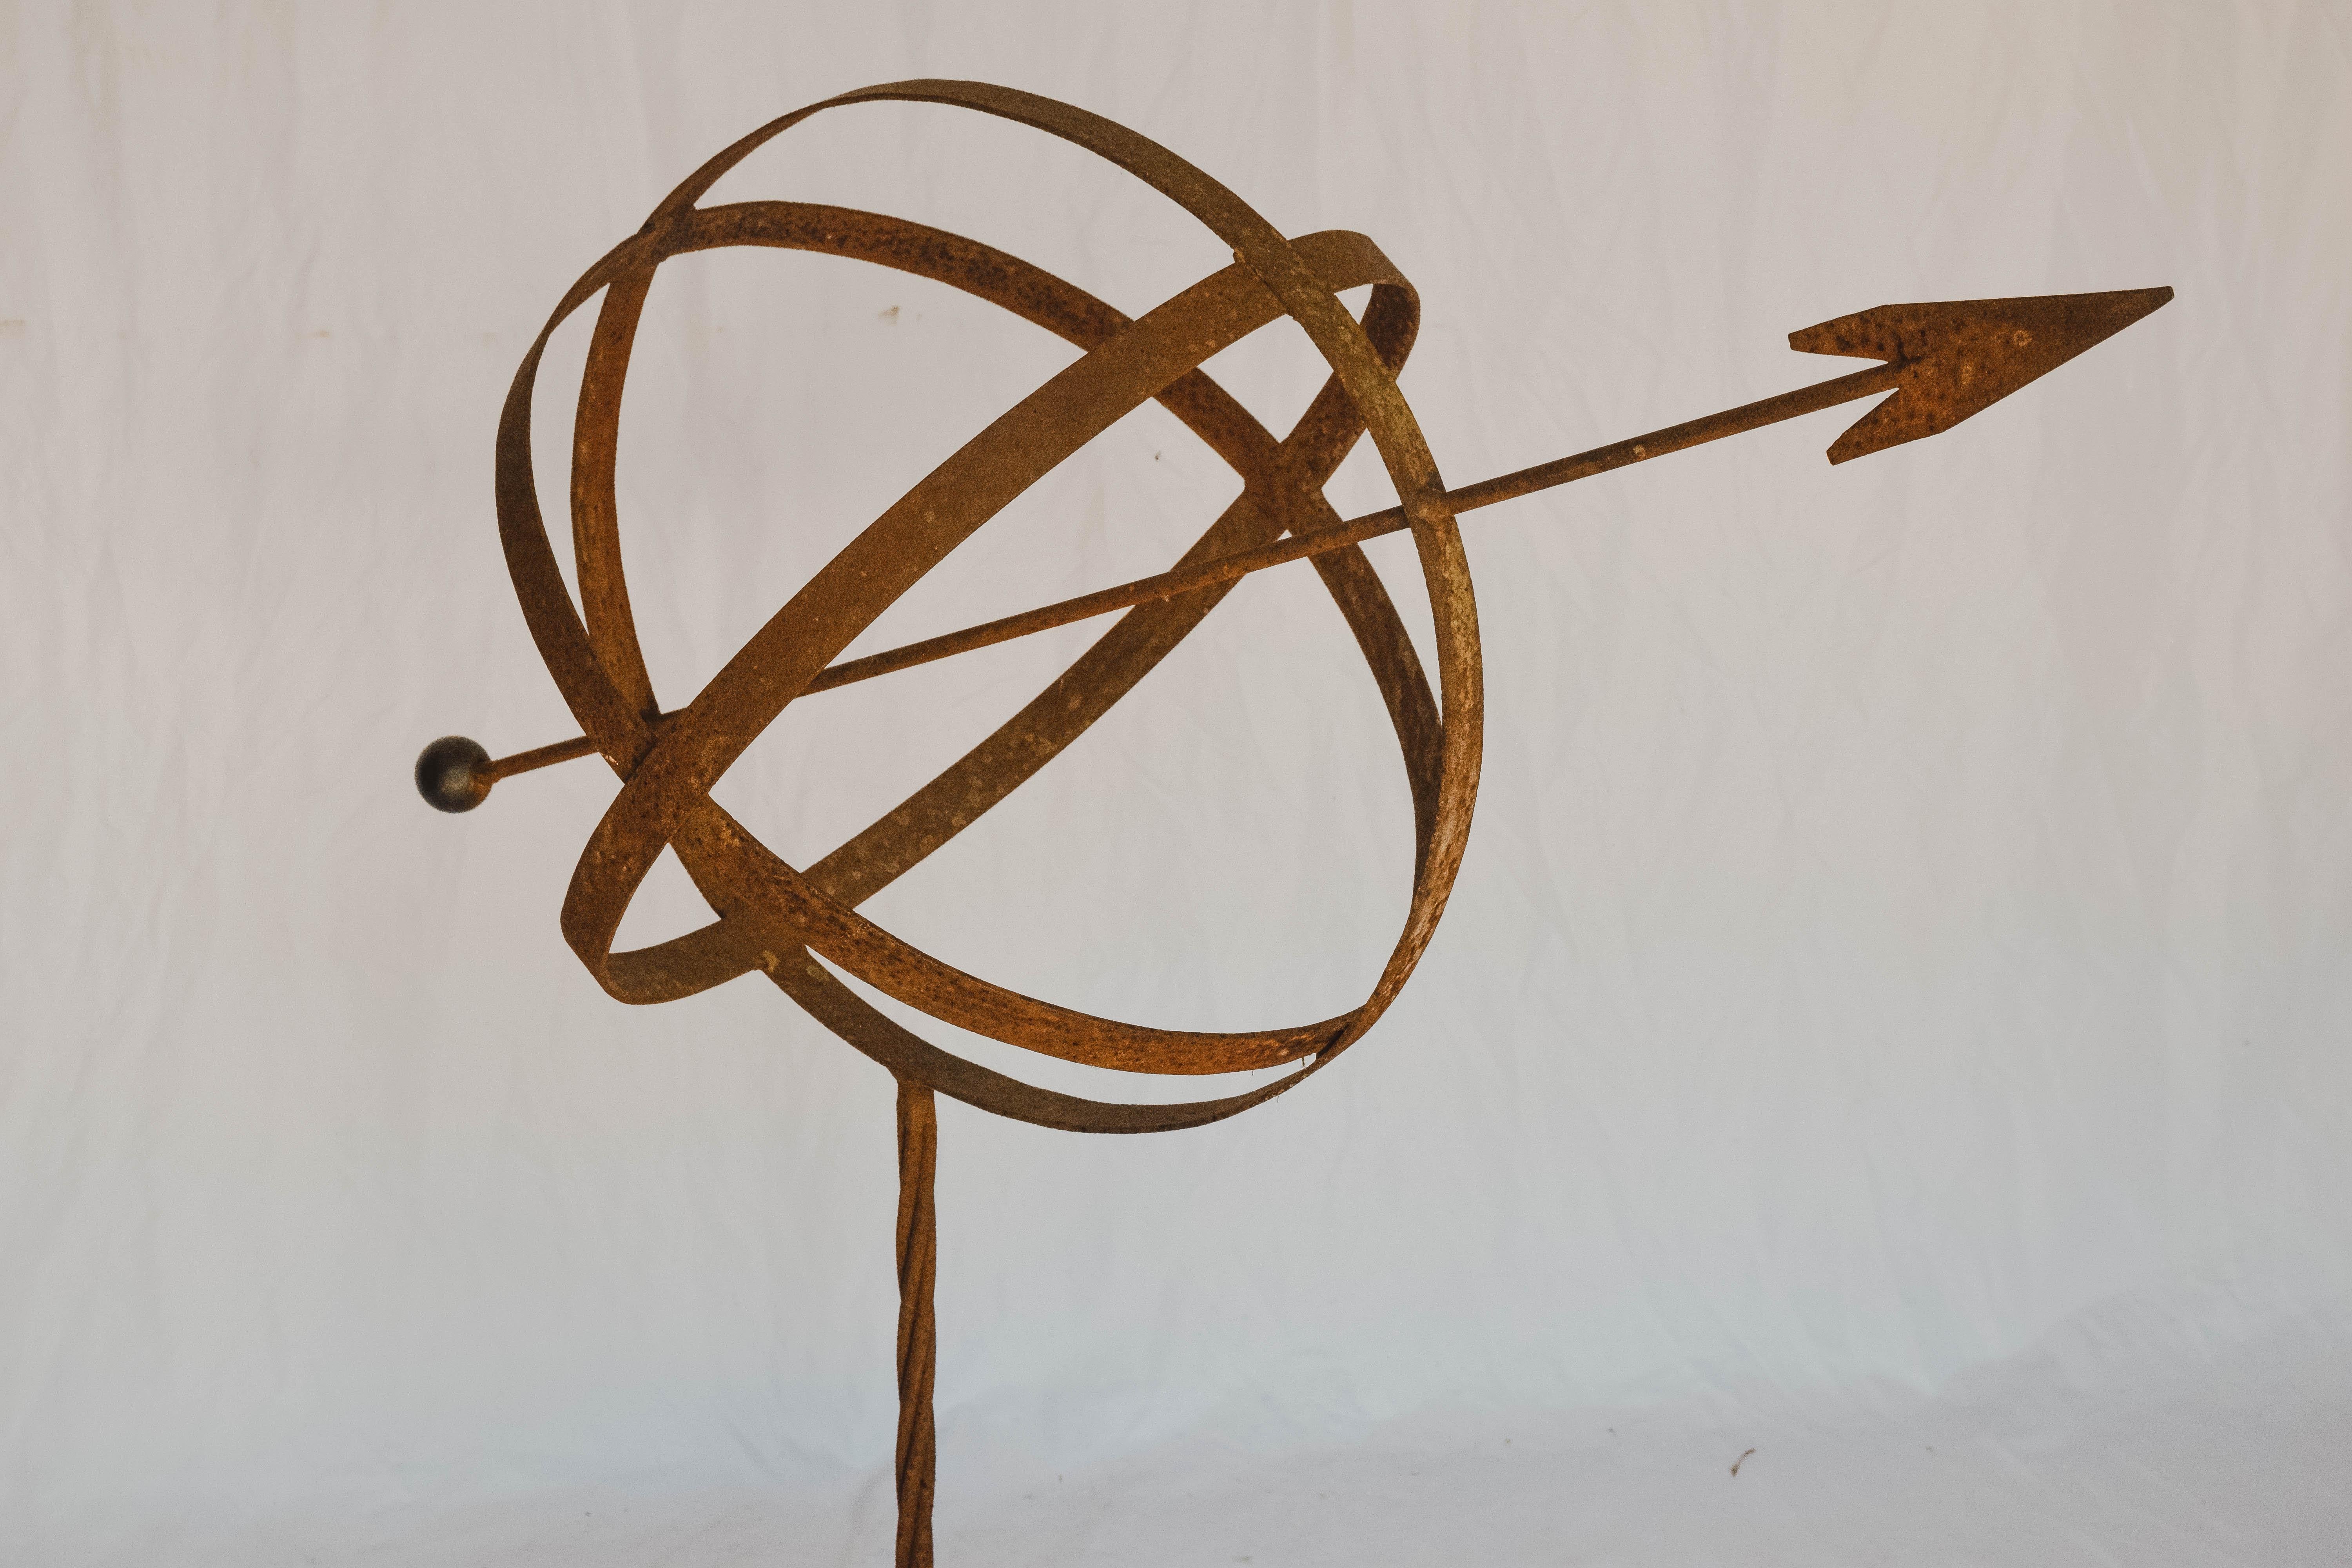 This armillary sphere is made of metal and has a rust color finish. It is mounted on a small concrete square. As a conversation piece or as an addition to a scientific collection, it will add beauty to any environment.